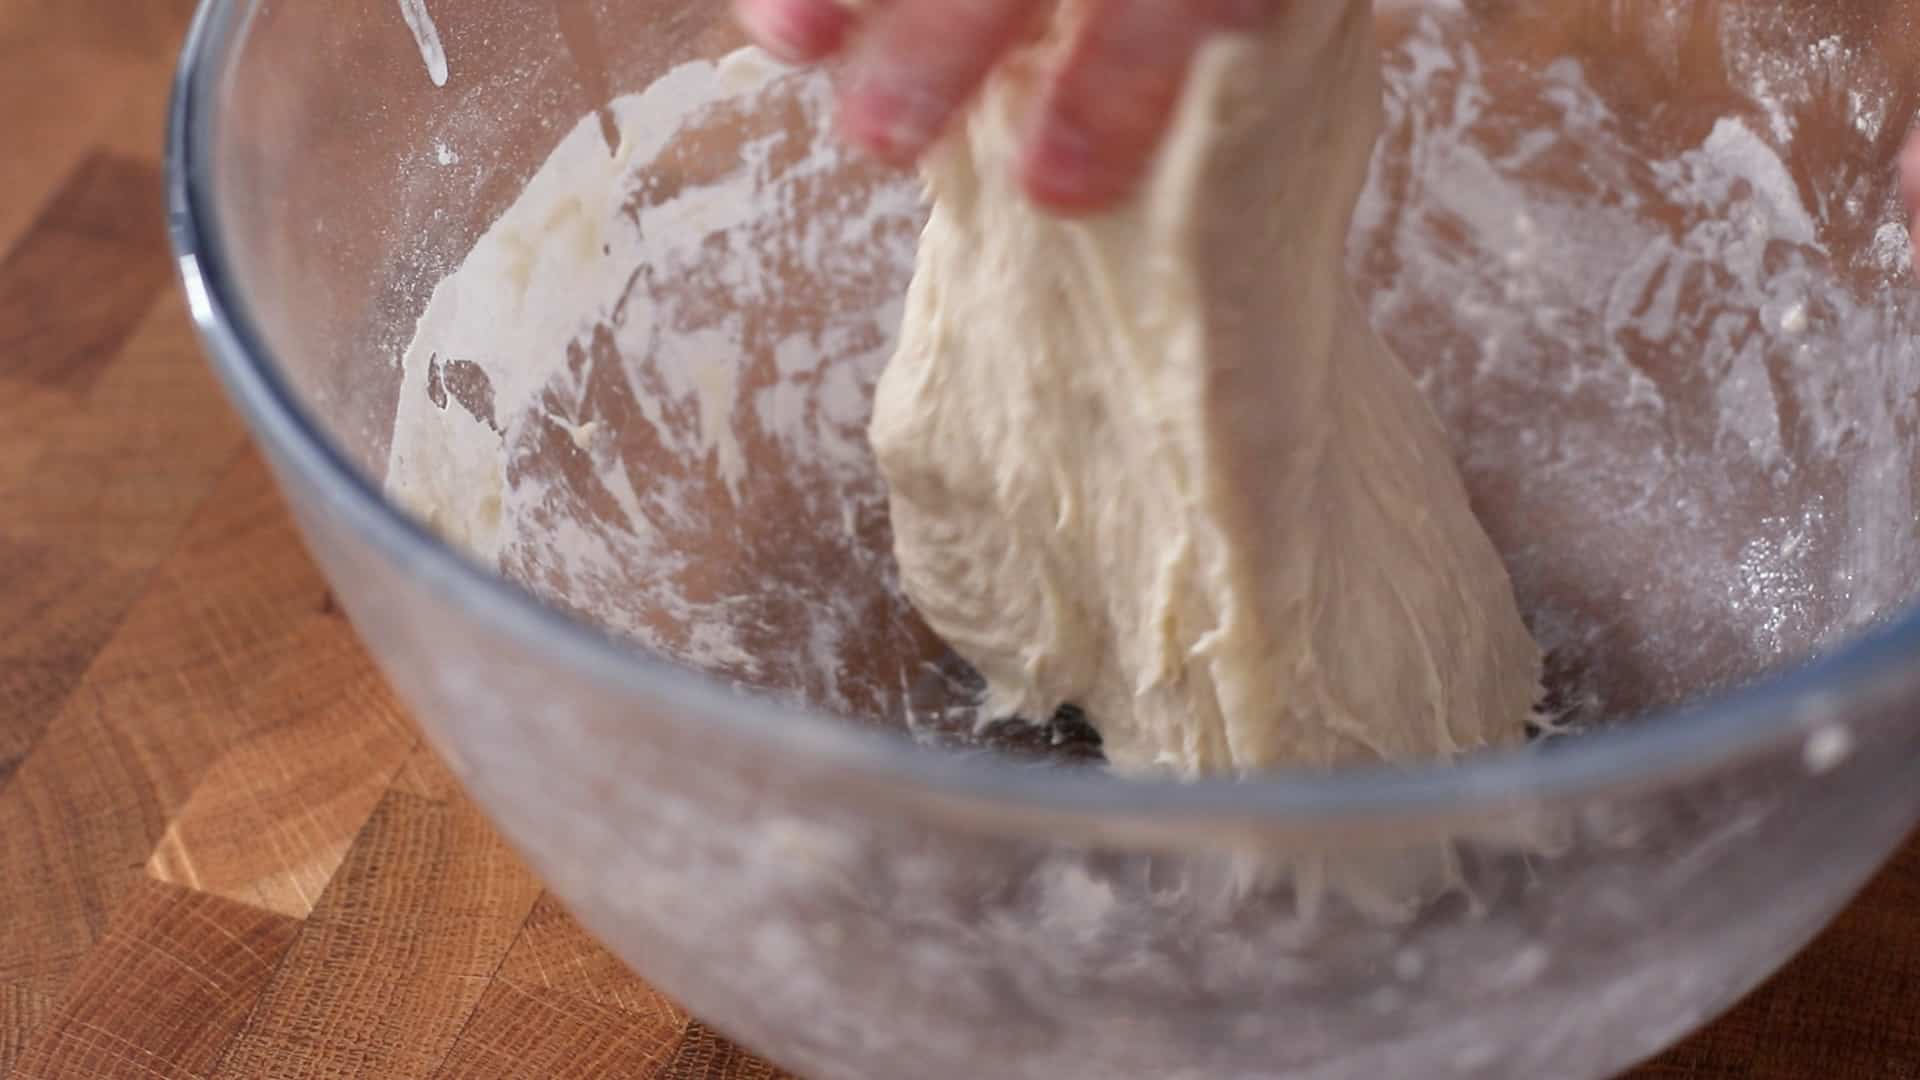 Lifting bread dough out of the bowl